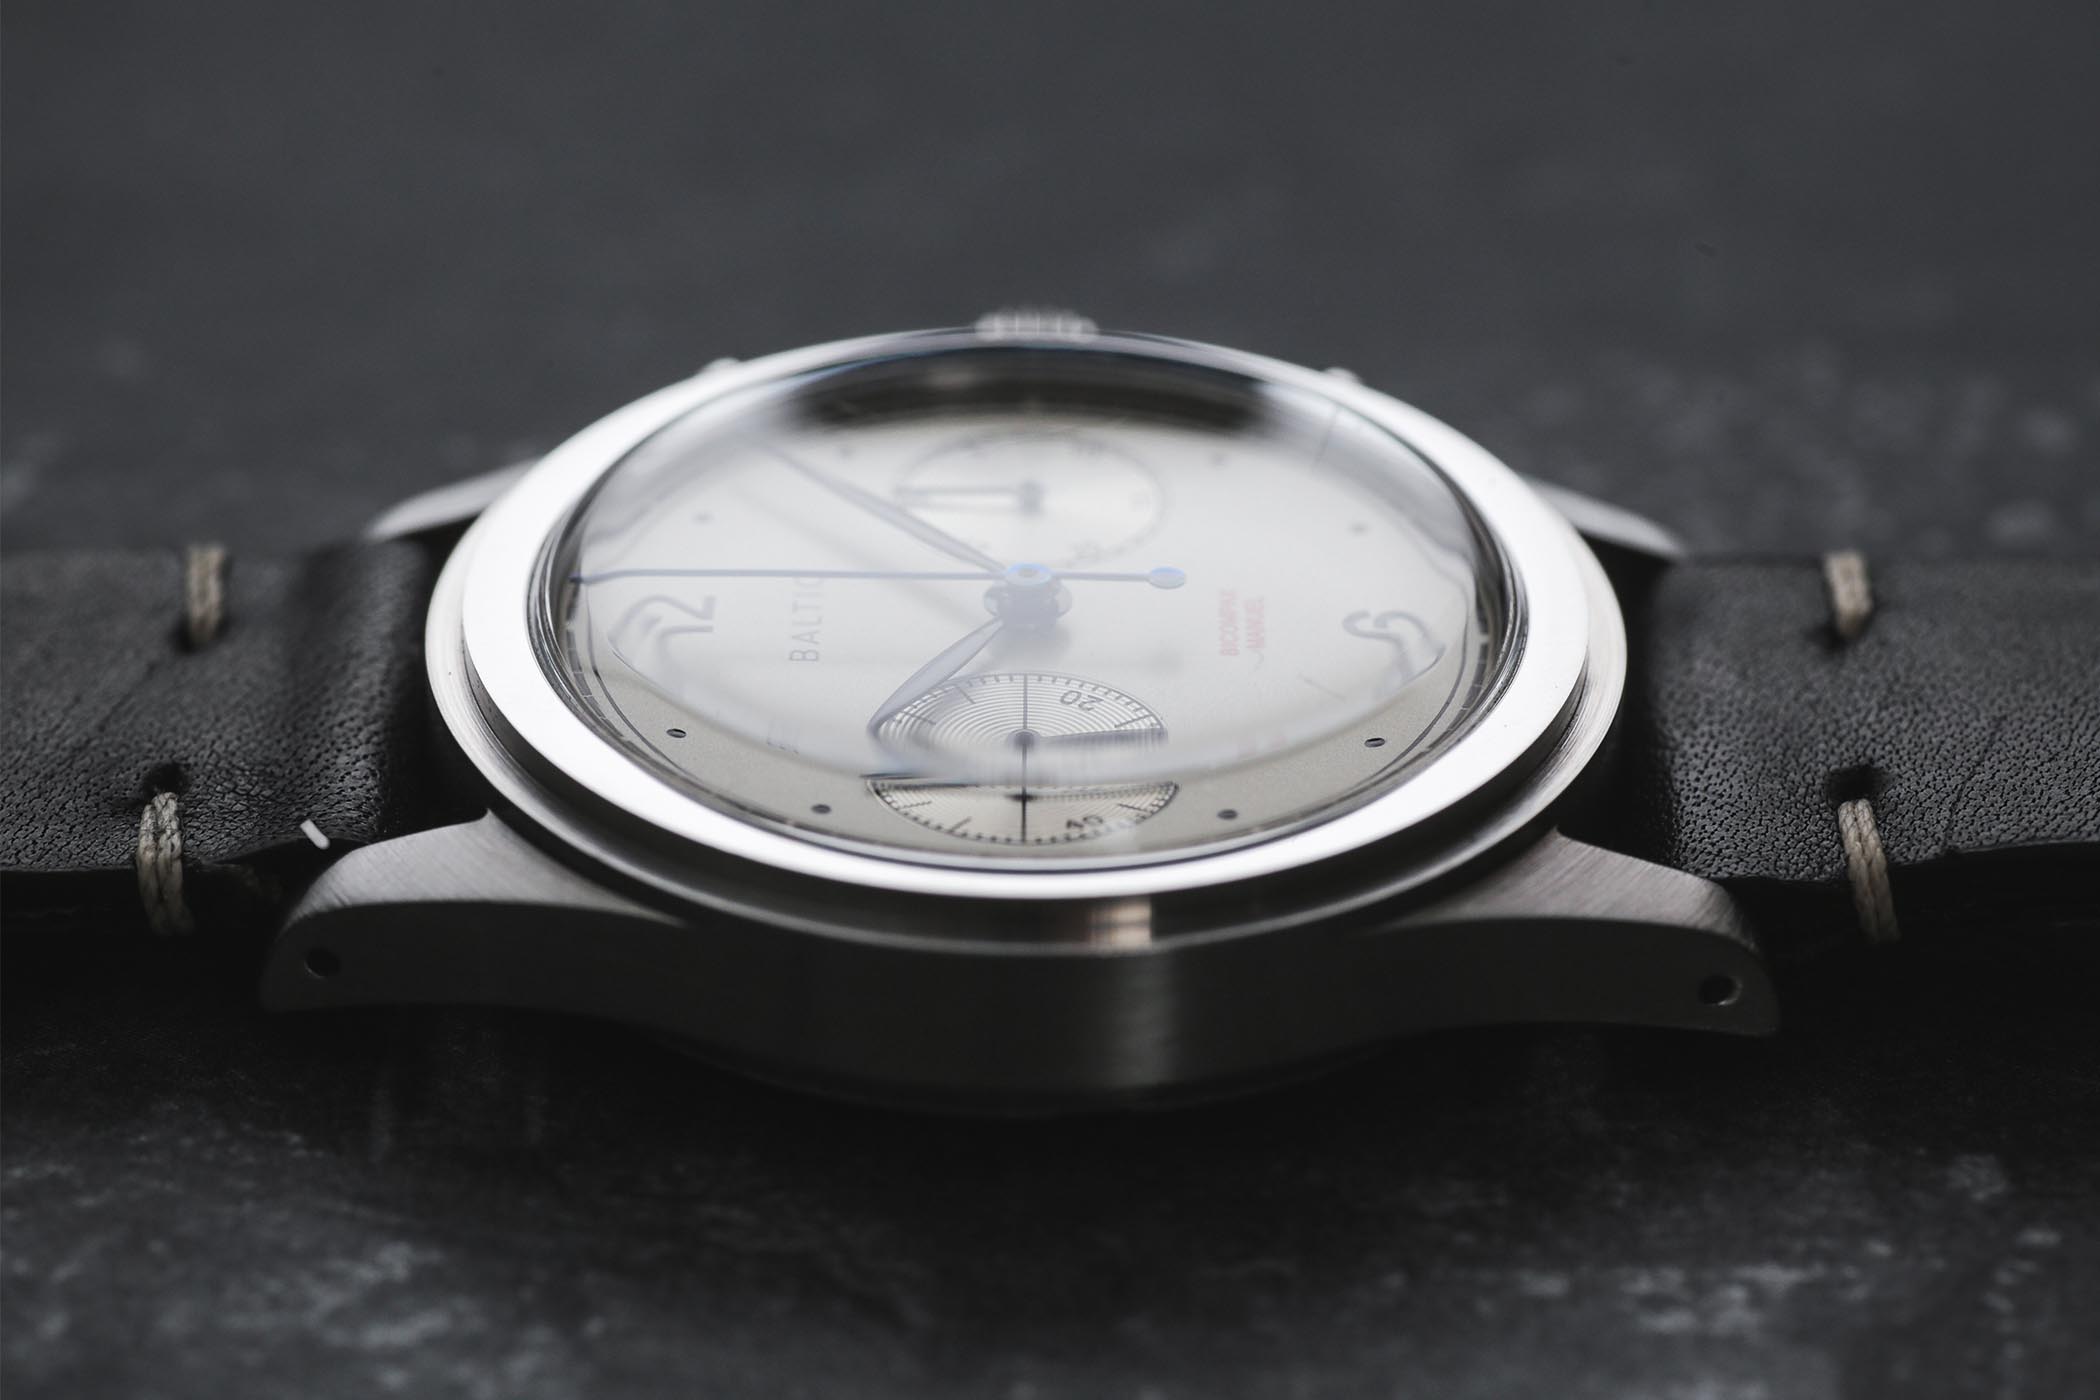 Baltic Watches bicompax 001